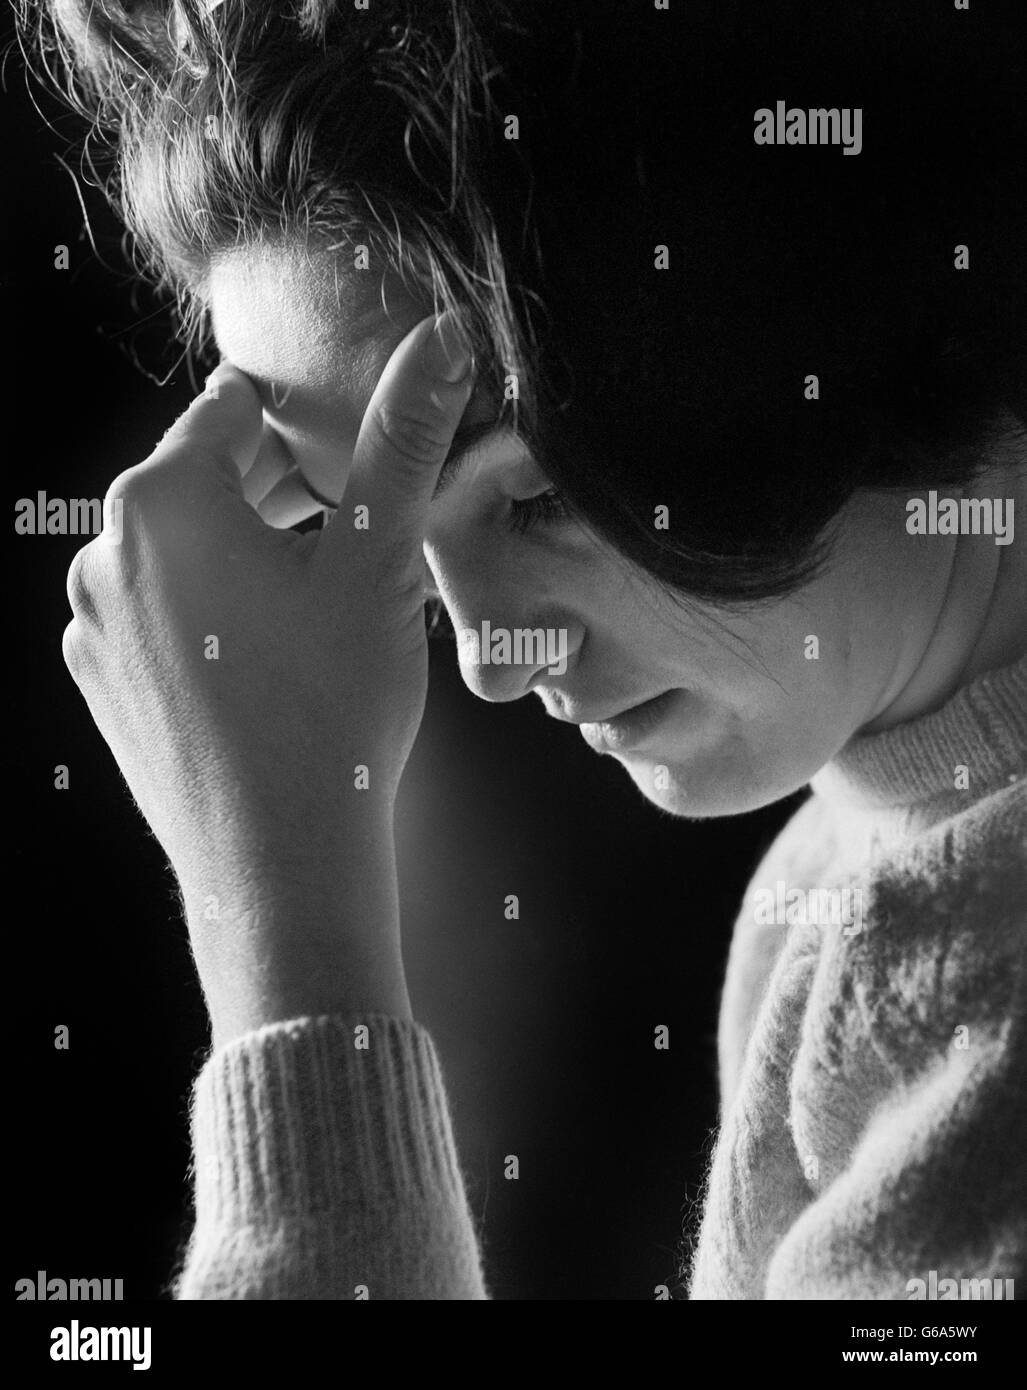 1960s 1970s WOMAN HOLDING HER FOREHEAD IN HER HAND HEADACHE TIRED DEPRESSED SAD Stock Photo